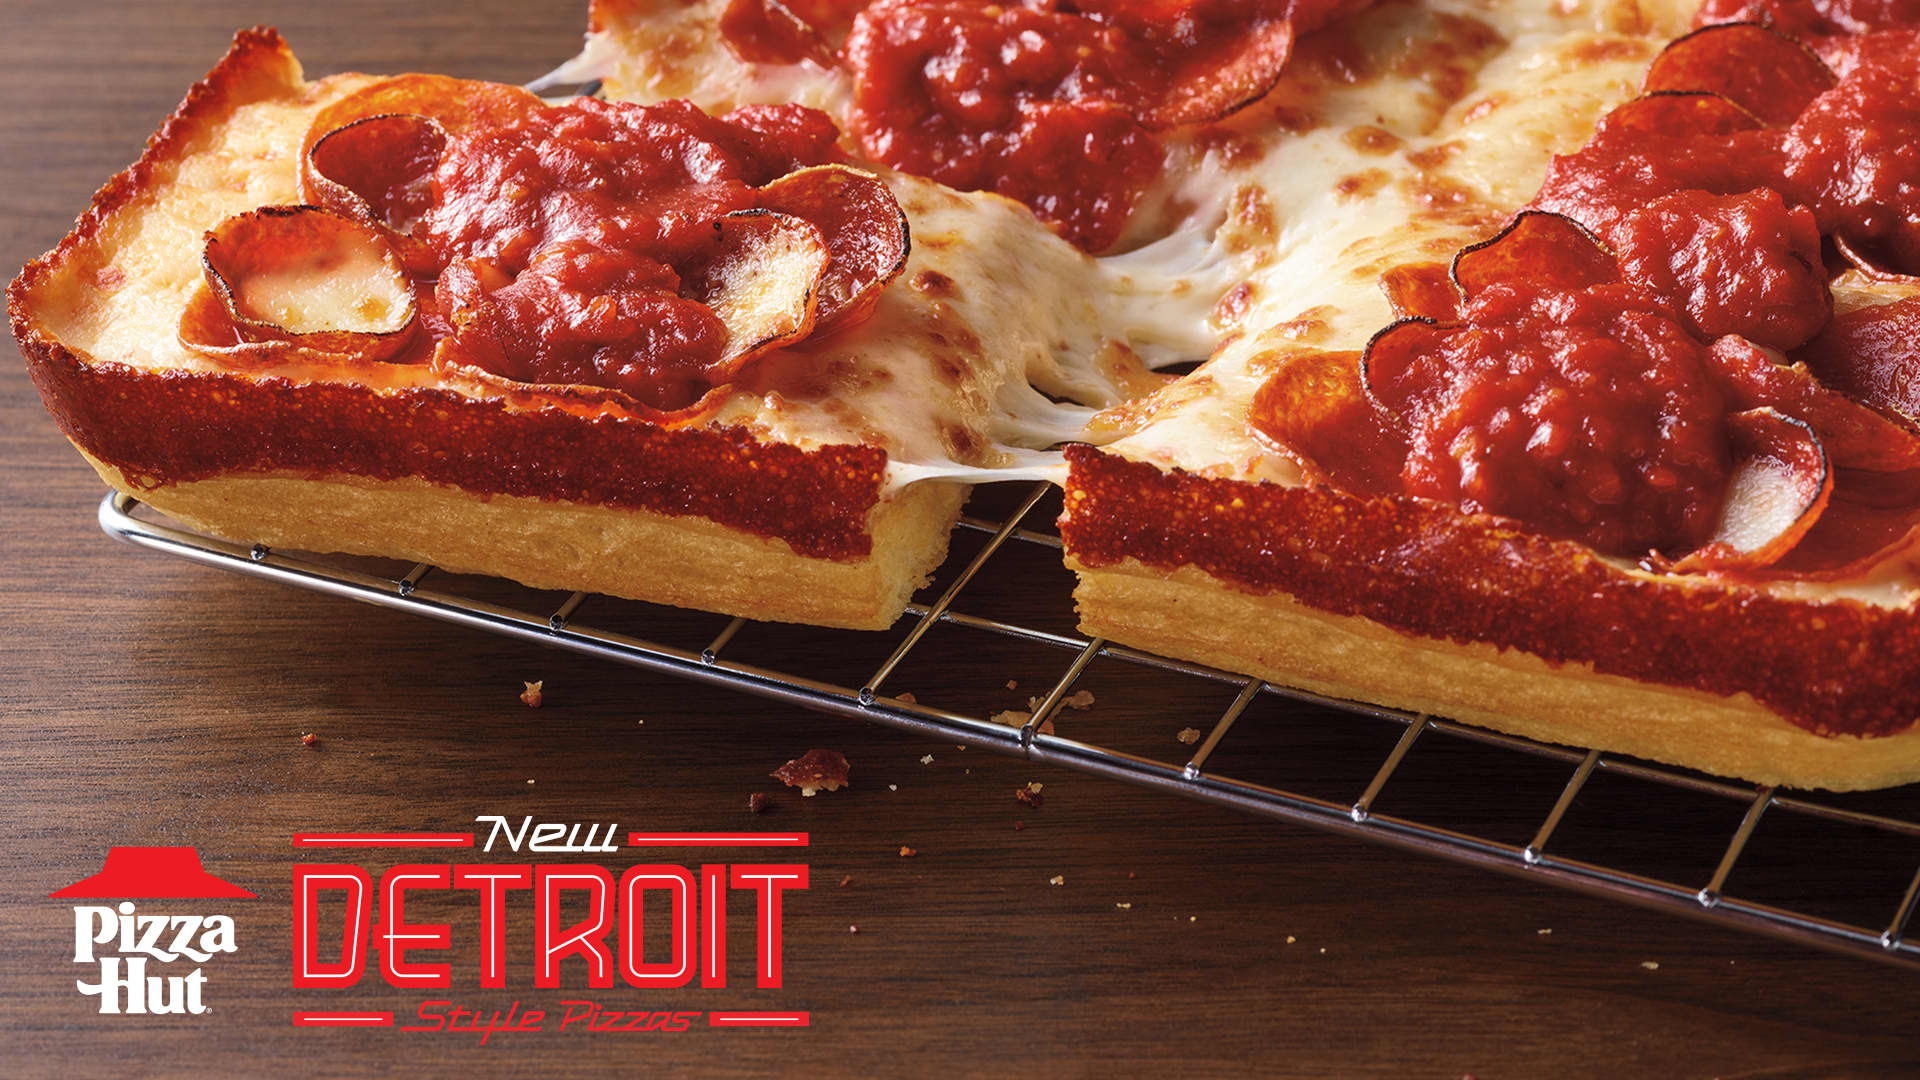 Pizza Hut will launch Detroit-style pizza as its turnaround continues